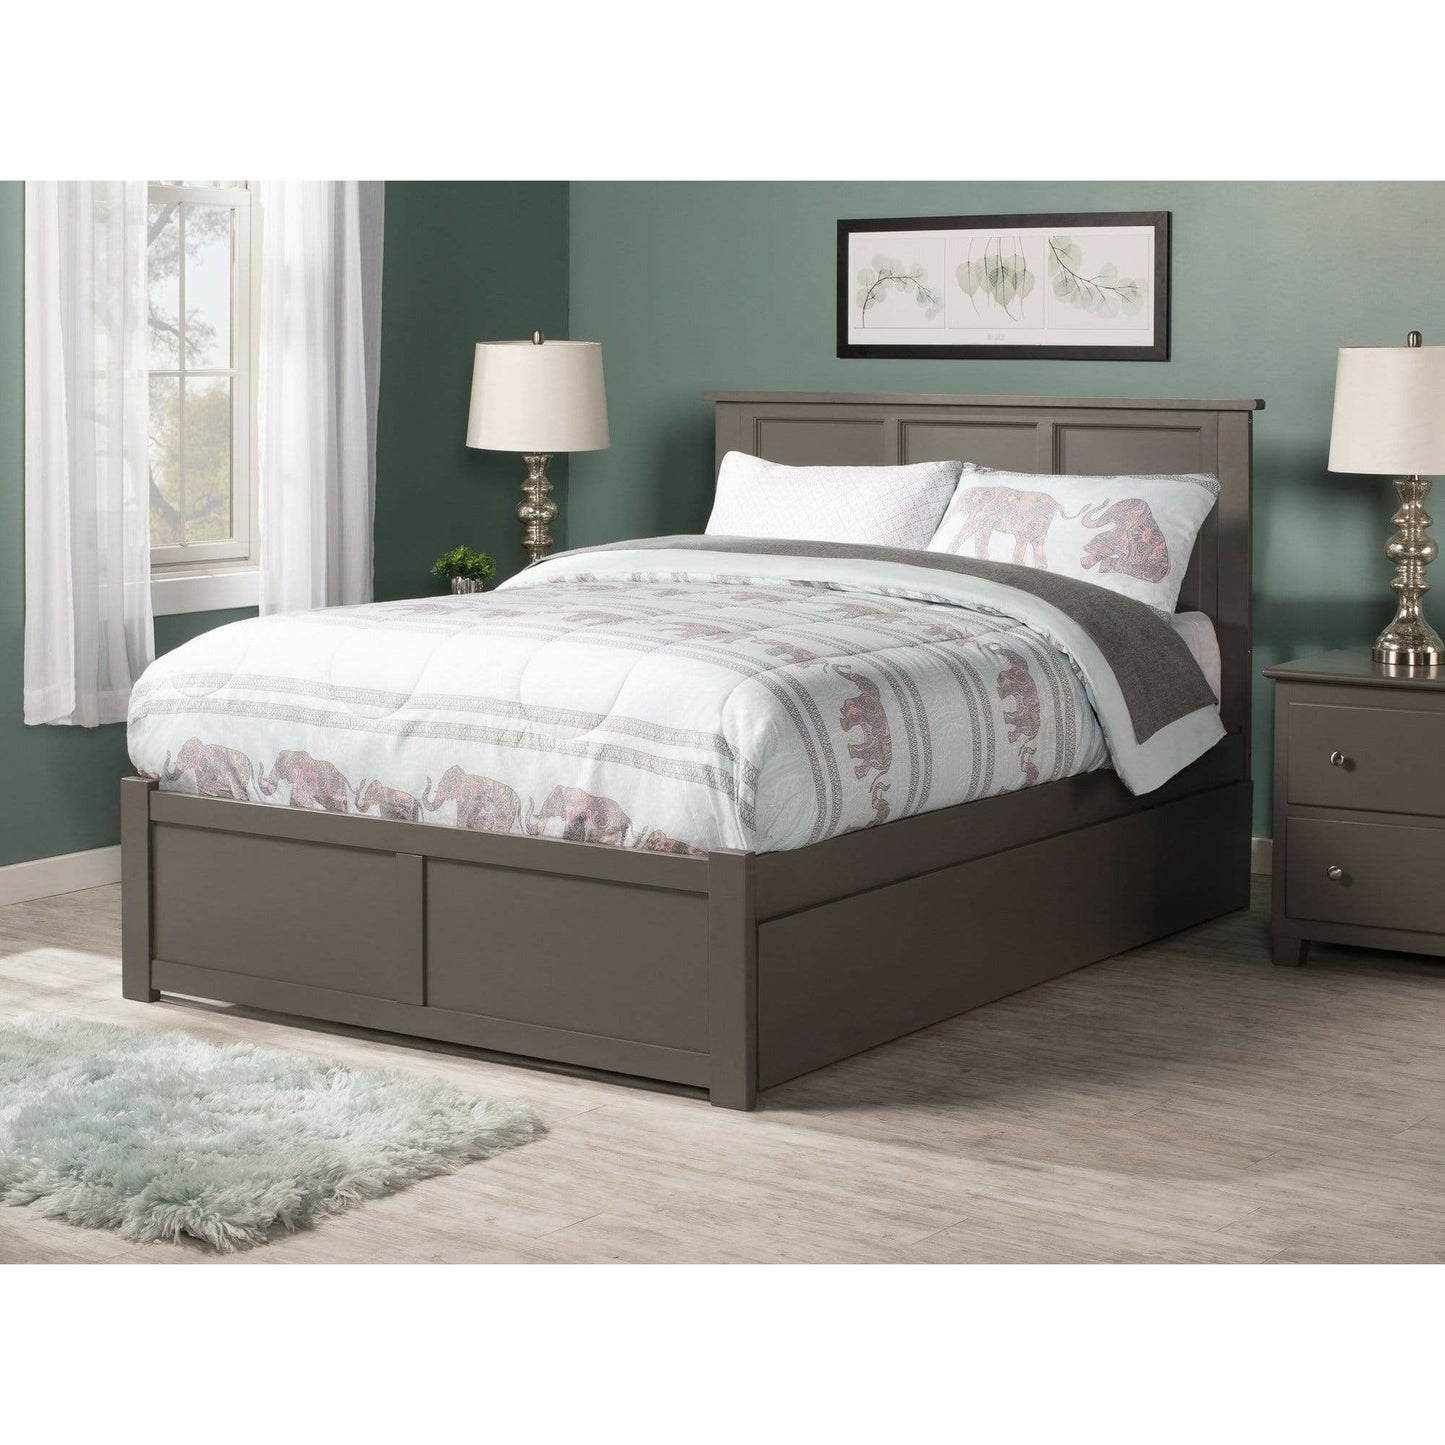 Atlantic Furniture Bed Grey Madison Full Platform Bed with Matching Foot Board with Full Size Urban Trundle Bed in Espresso